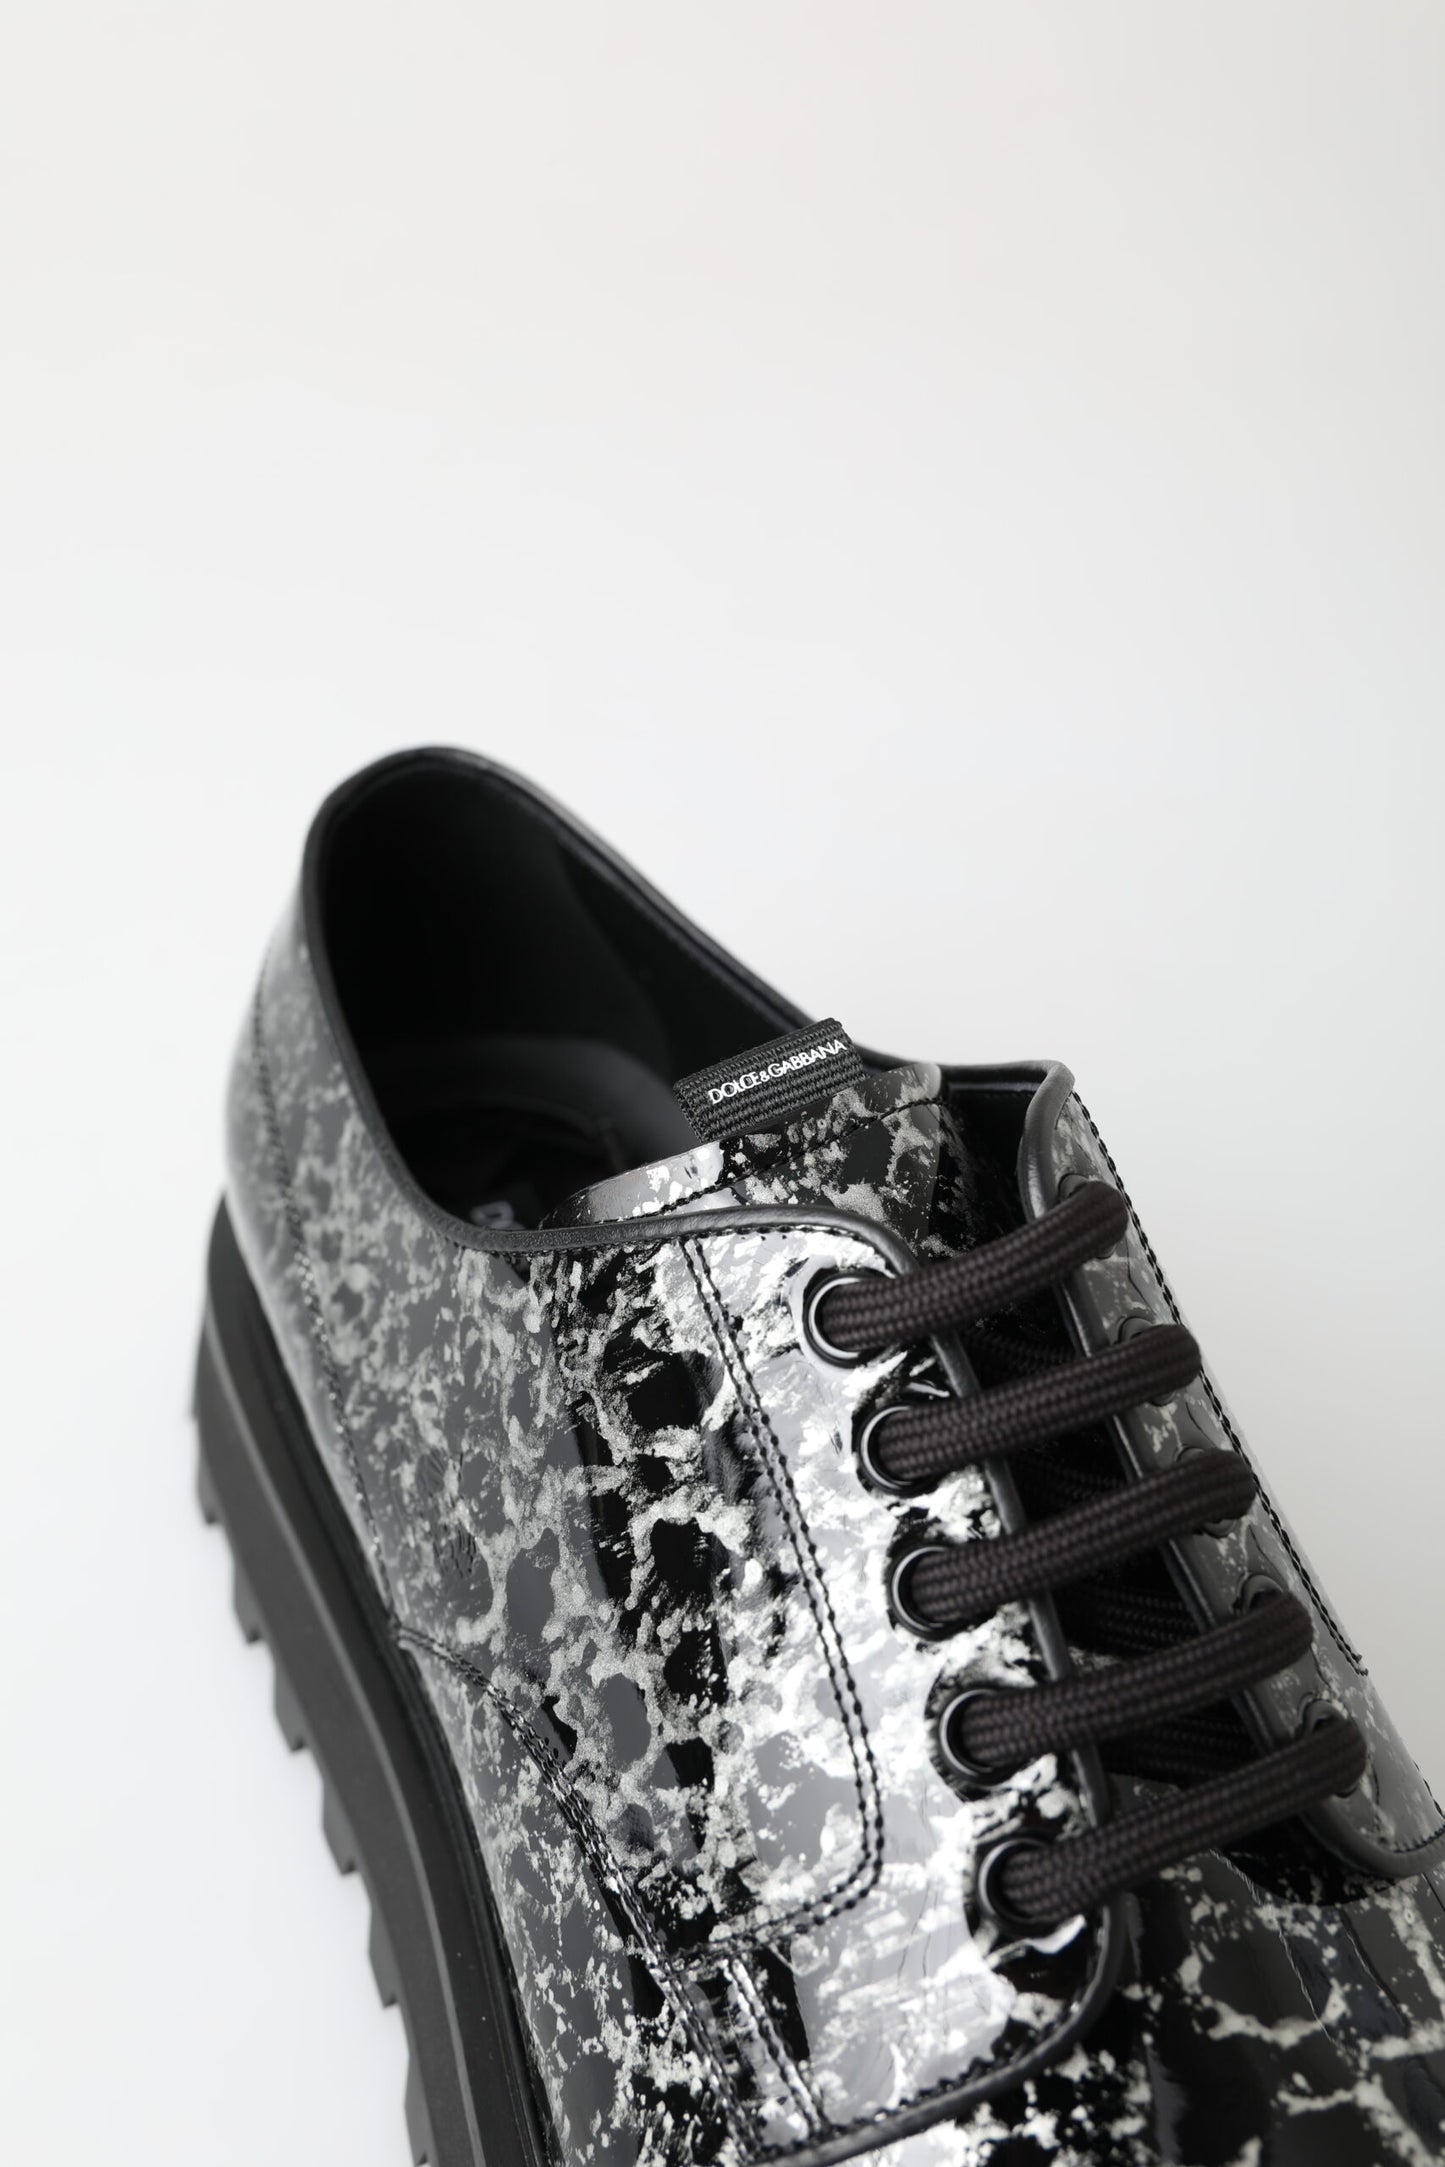 Dolce & Gabbana Black White Derby Patent Leather Shoes